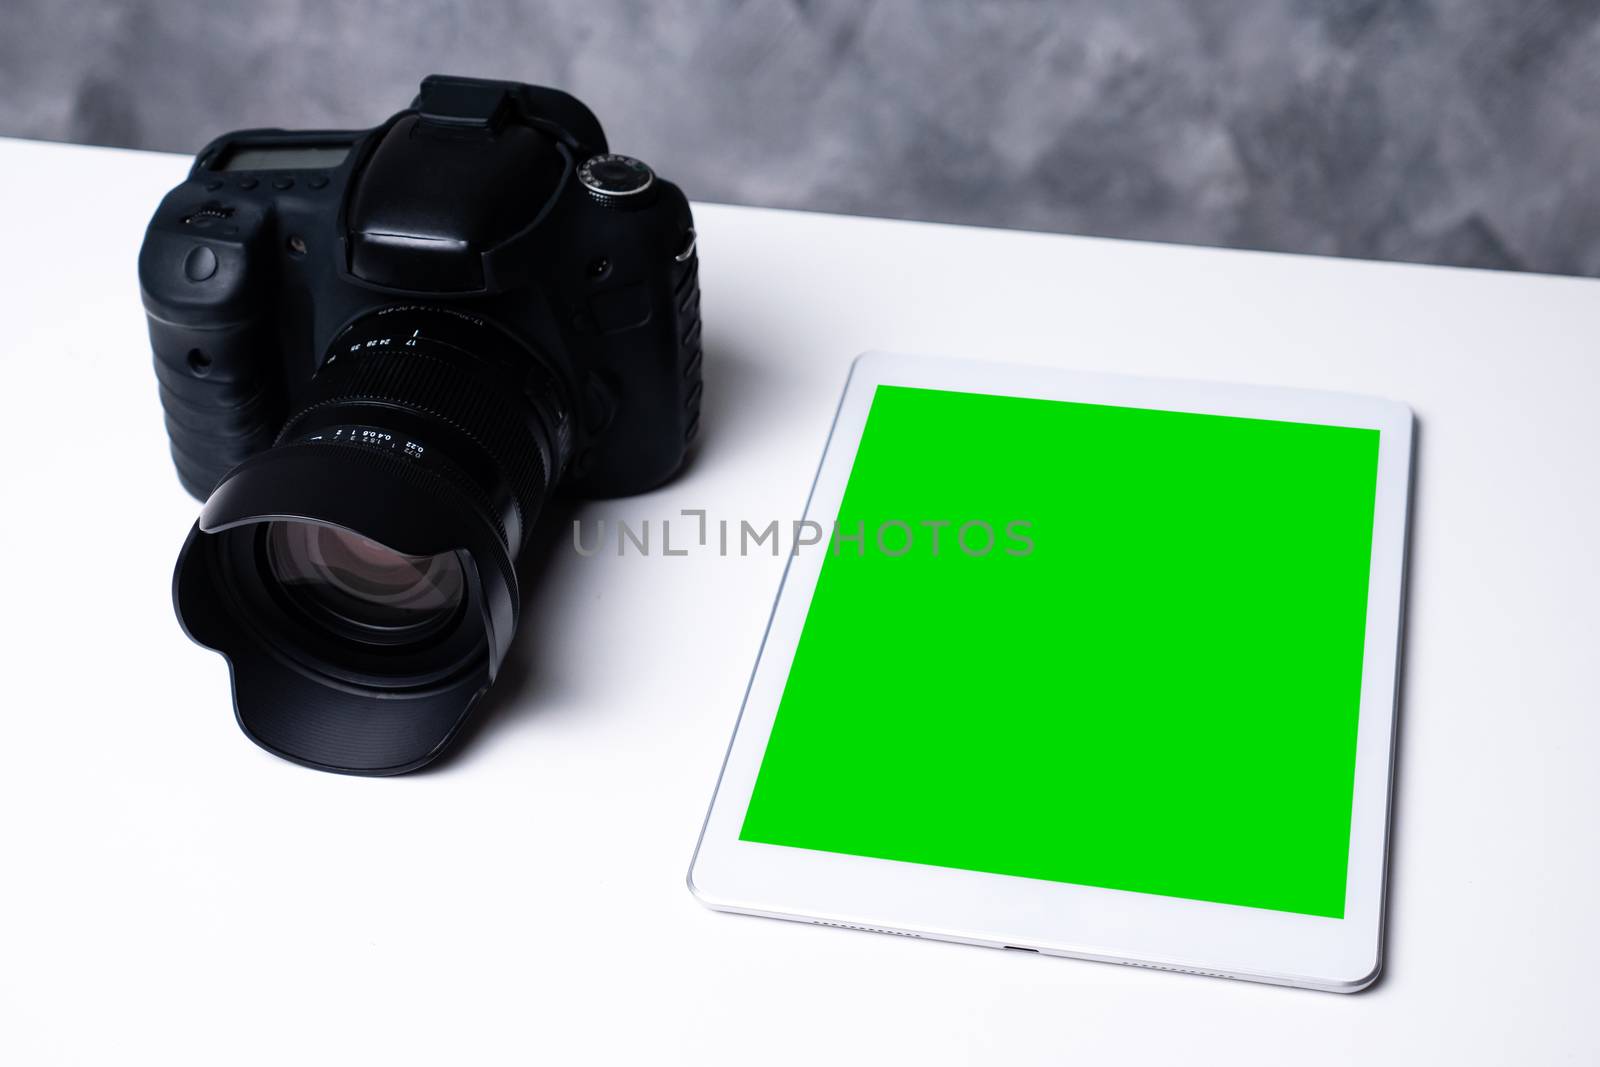 A black digital camera and a blank screen tablet on a table.